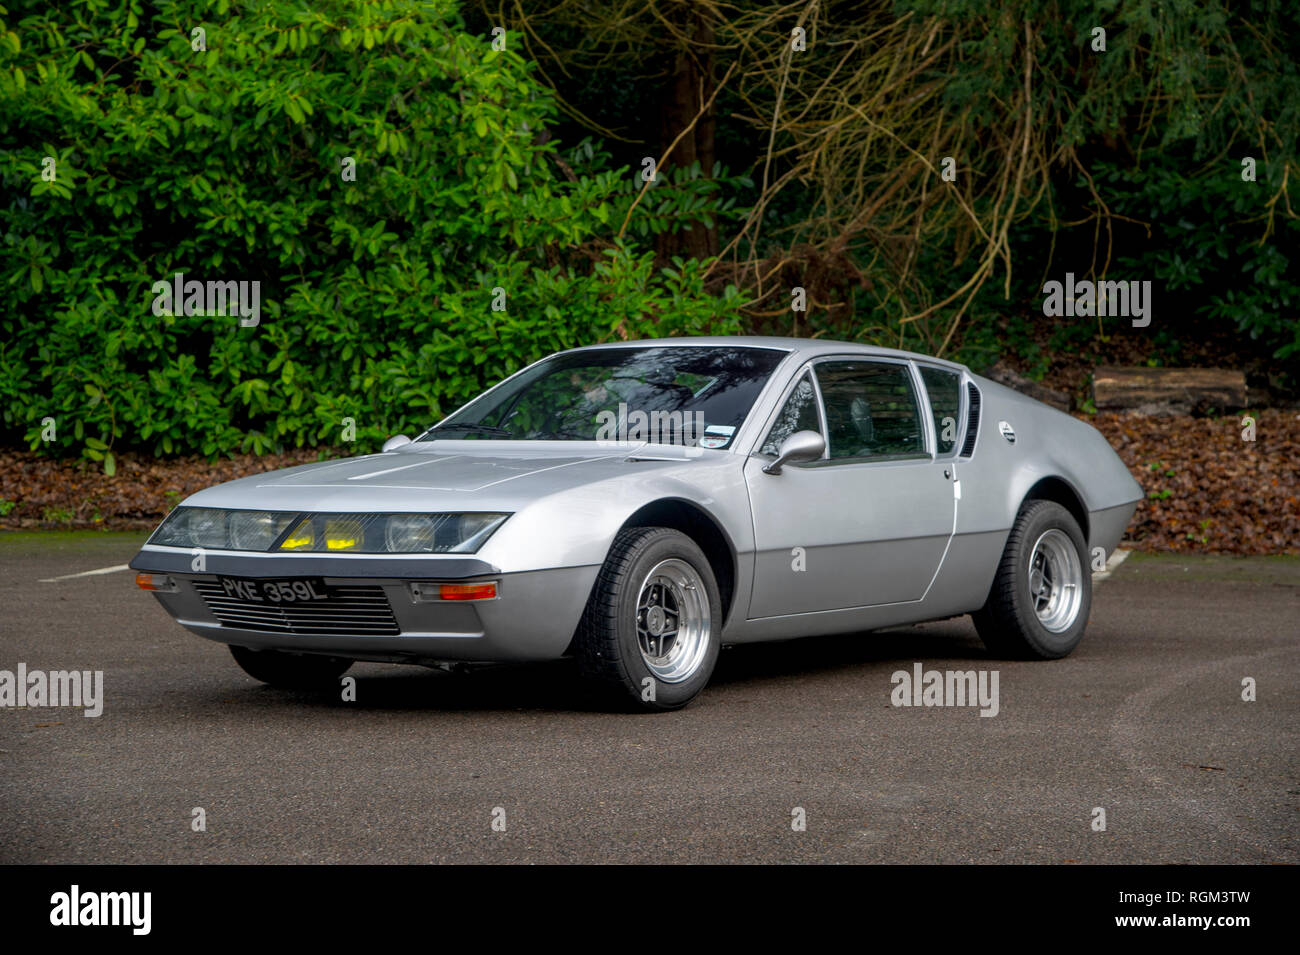 1973 Renault Alpine A310 classic French sports car Stock Photo